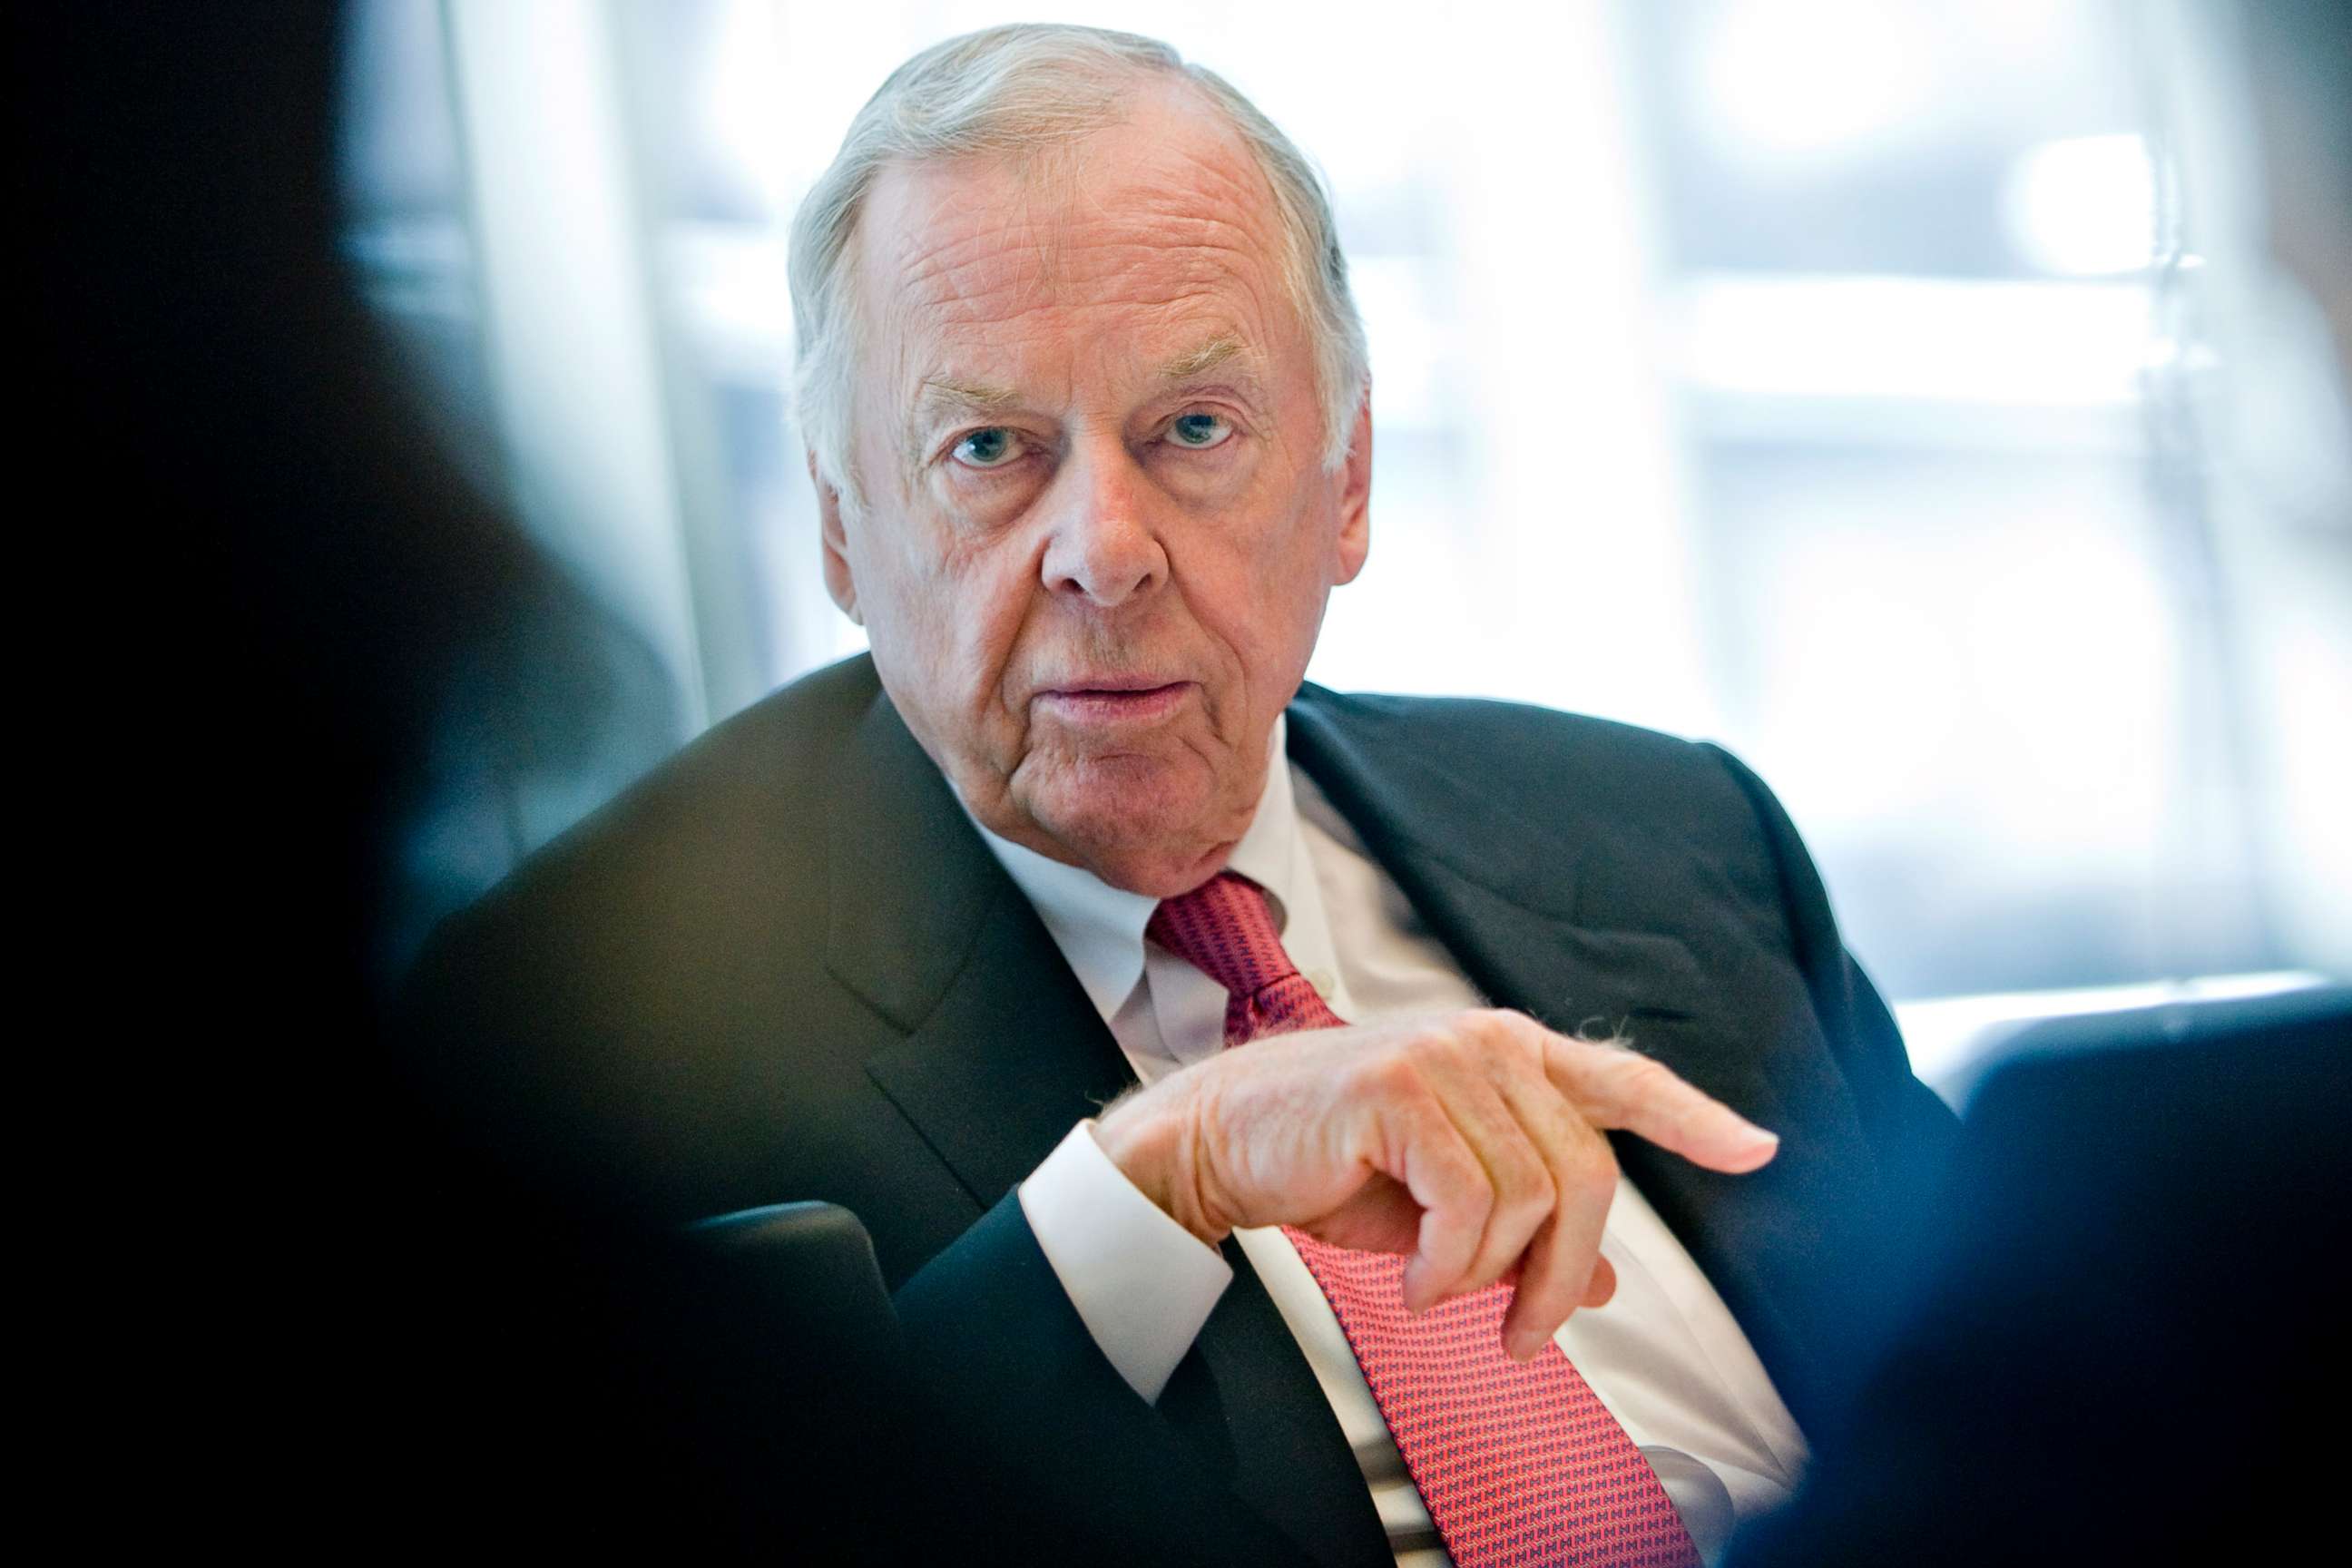 PHOTO: T. Boone Pickens, founder and chairman of BP Capital LLC, speaks during an interview in New York, Jan. 21, 2010.